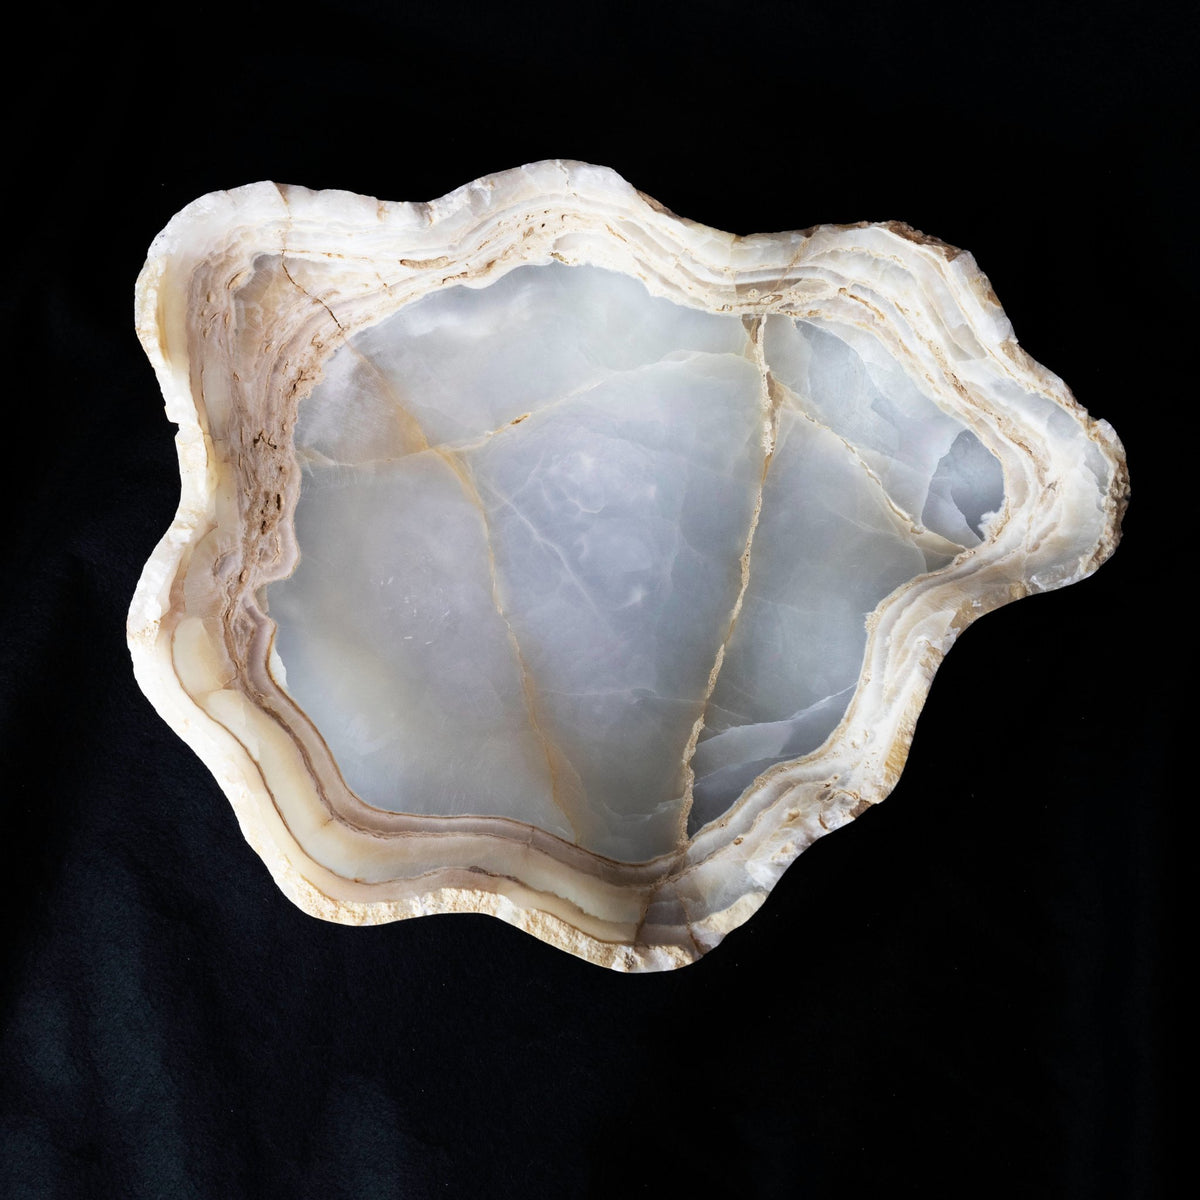 Matte Ice White Banded Onyx Bowl with Rustic Edge - Park City Jewelers